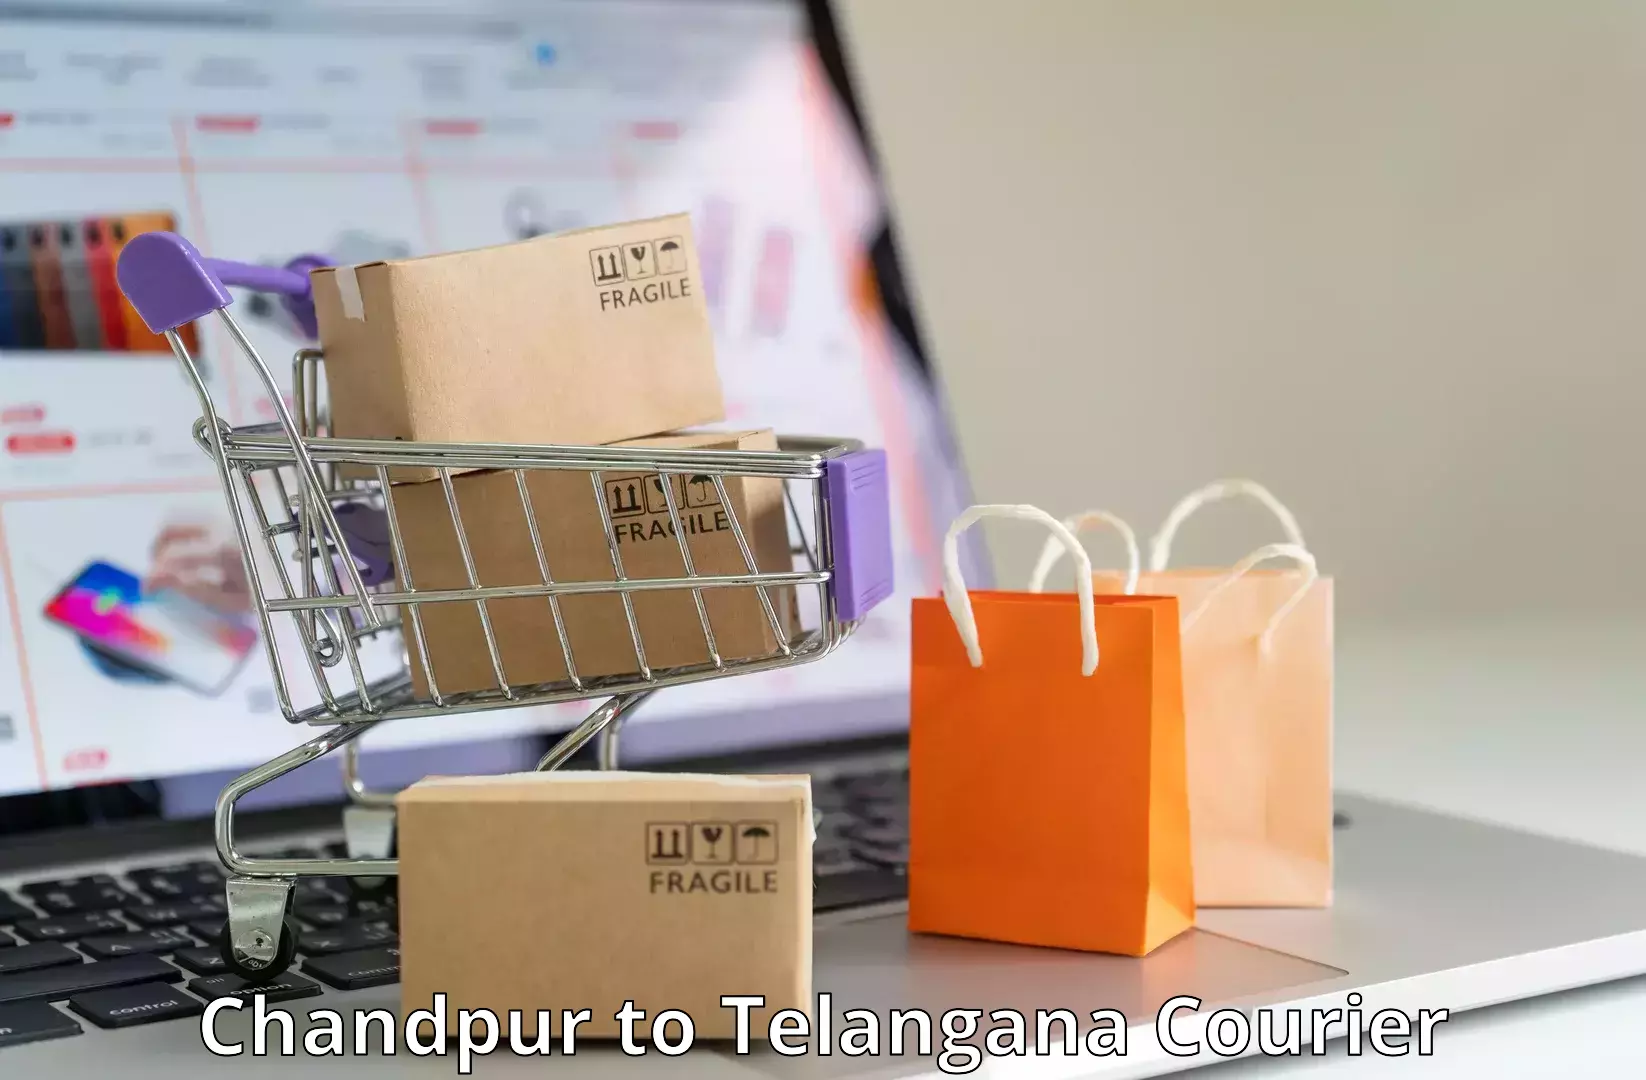 High-priority parcel service Chandpur to Bachupally